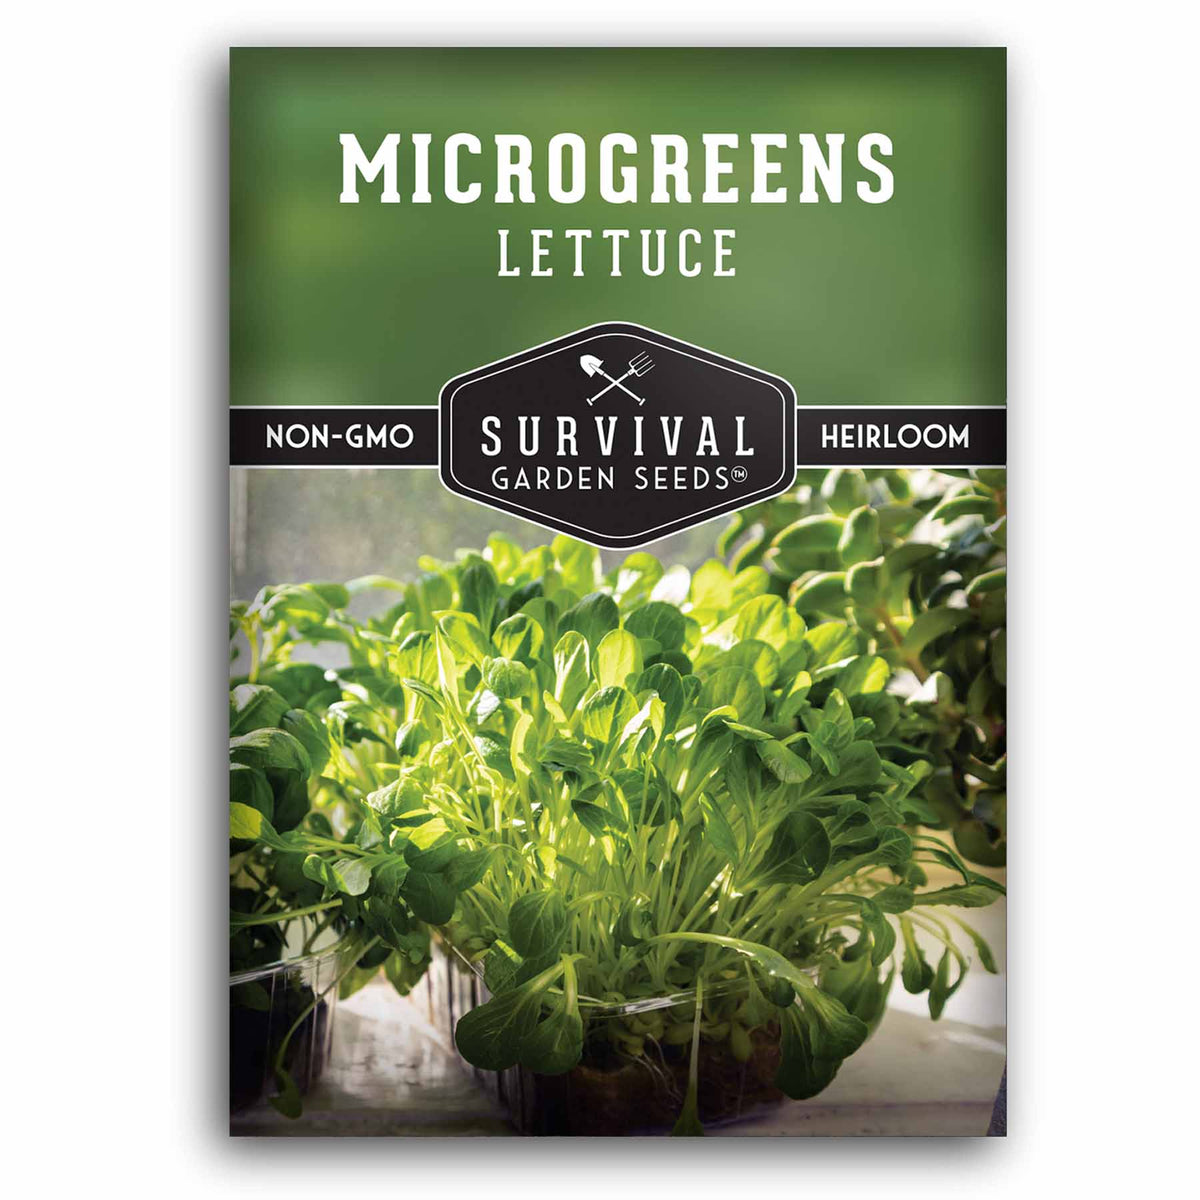 1 packet of Lettuce Microgreens seeds